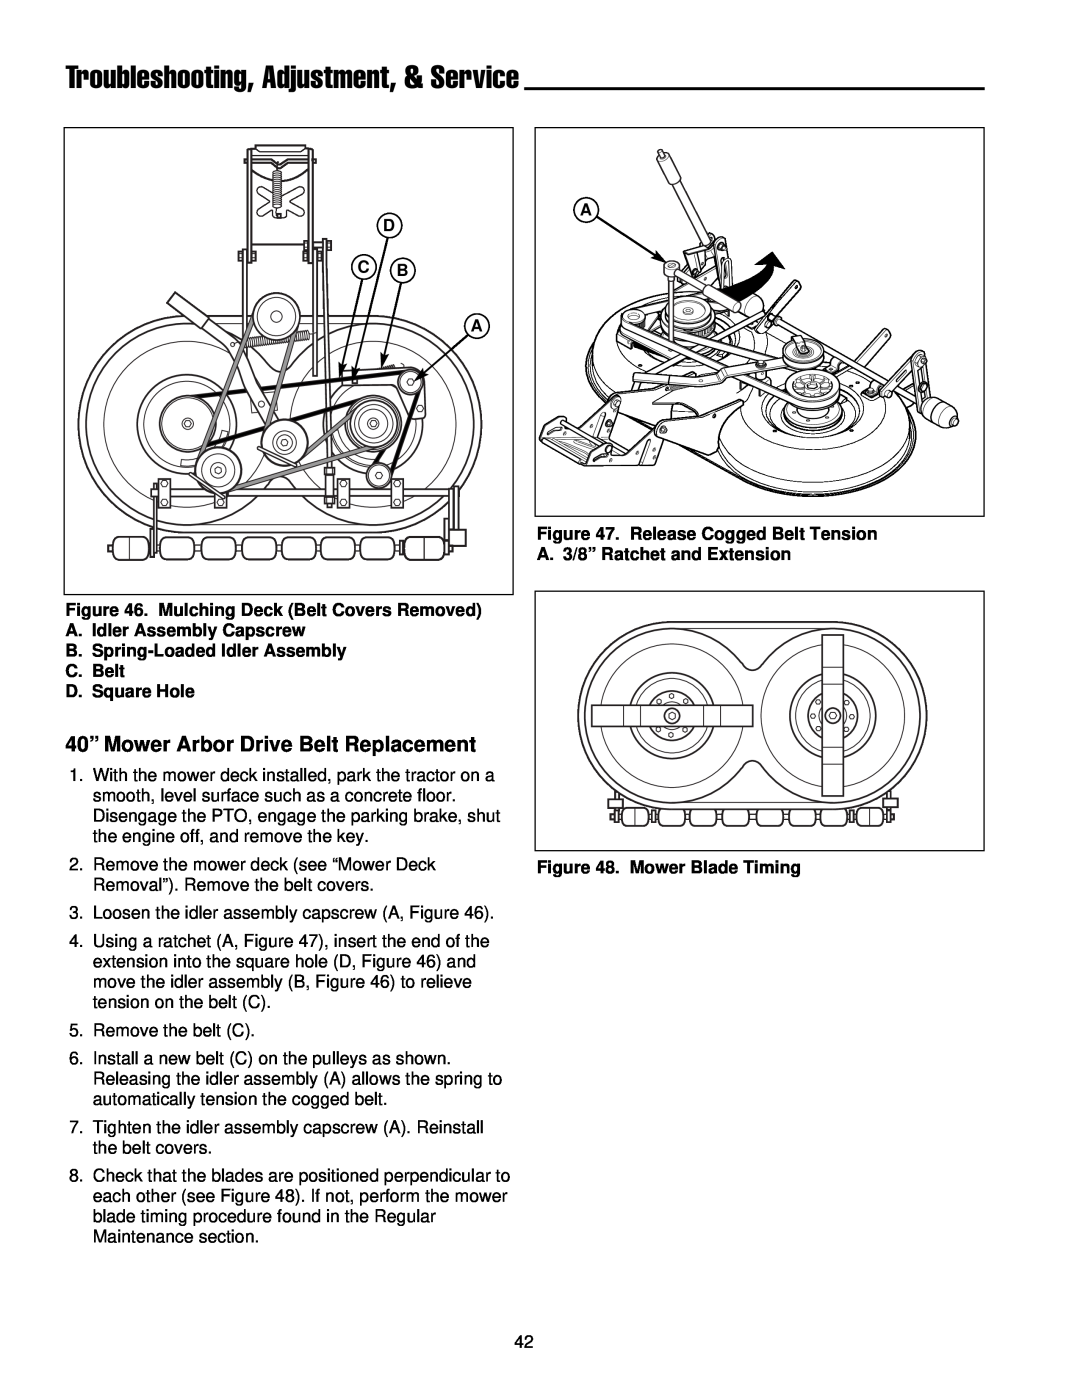 Simplicity 300 Series manual Troubleshooting, Adjustment, & Service, 40” Mower Arbor Drive Belt Replacement 